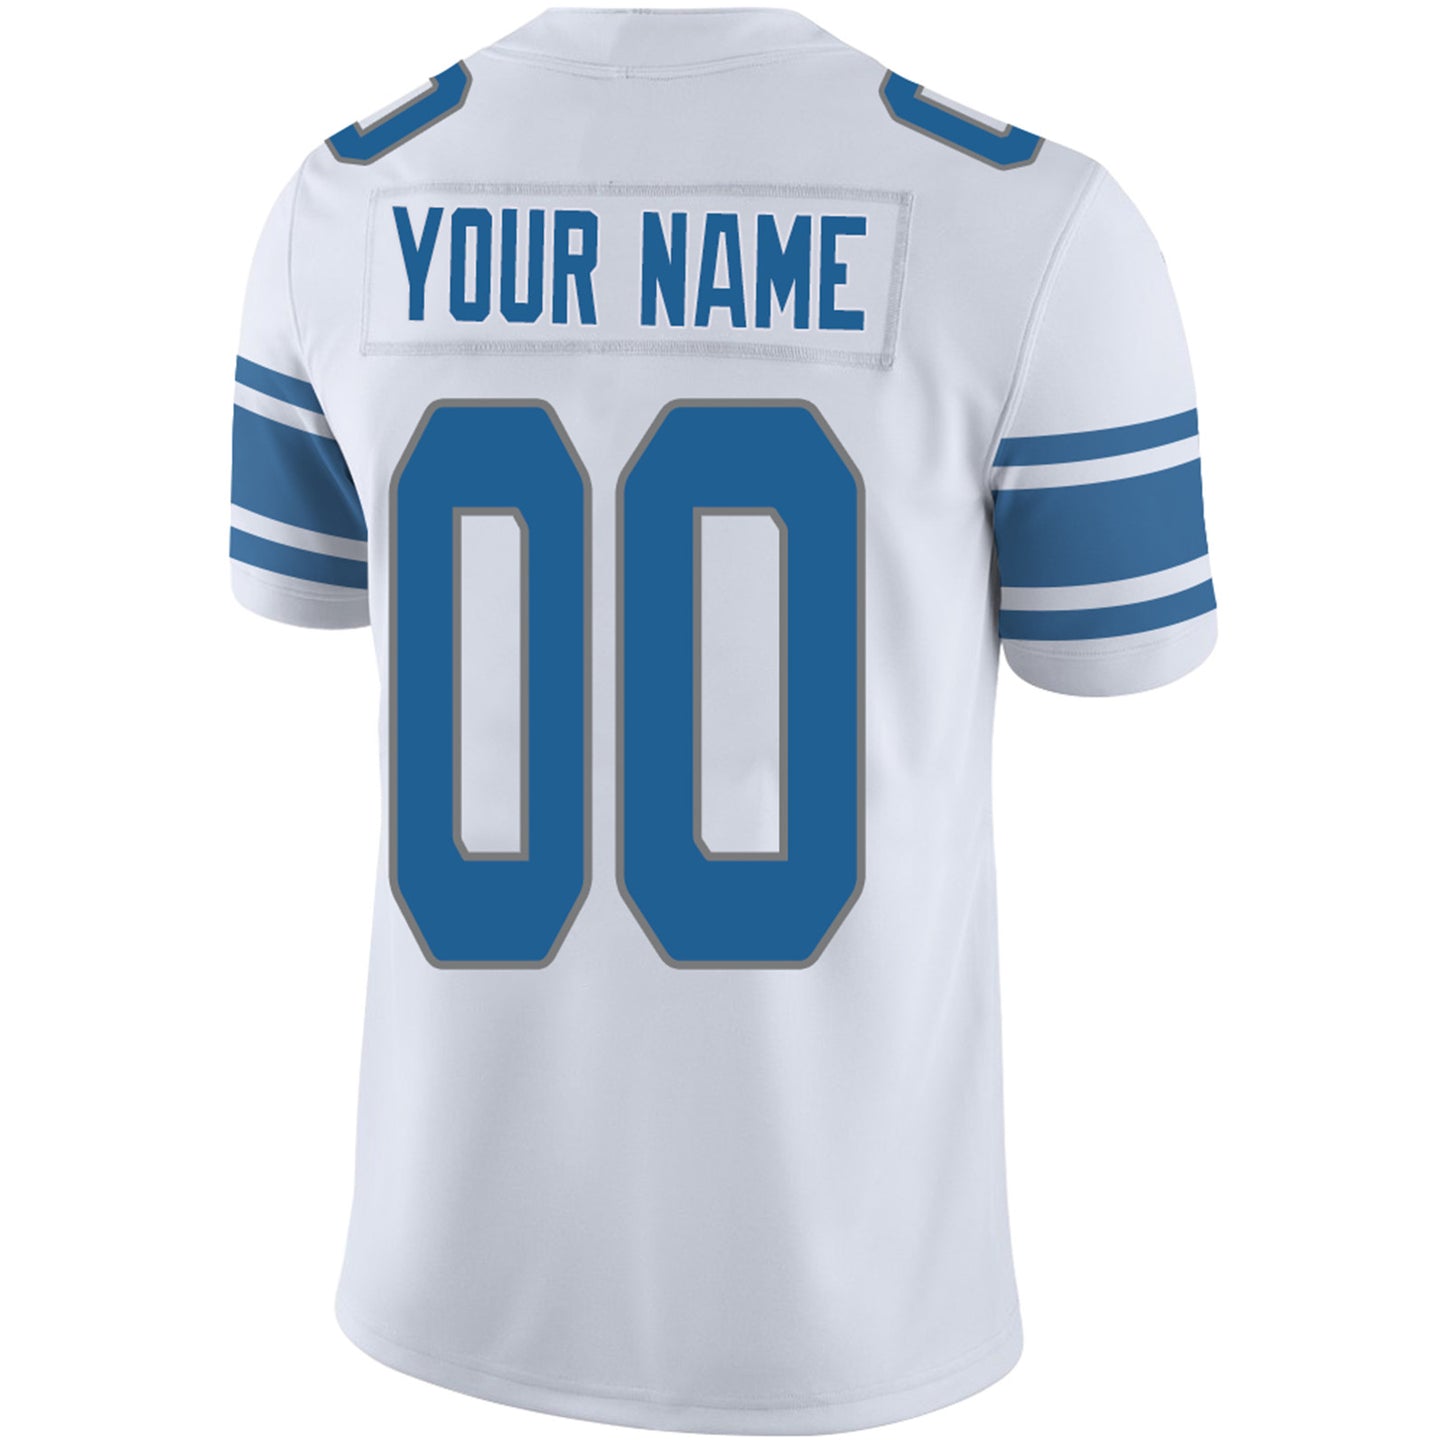 Custom D.Lions Football Jersey Team Player or Personalized Design Your Own Name for Men's Women's Youth Jerseys Blue